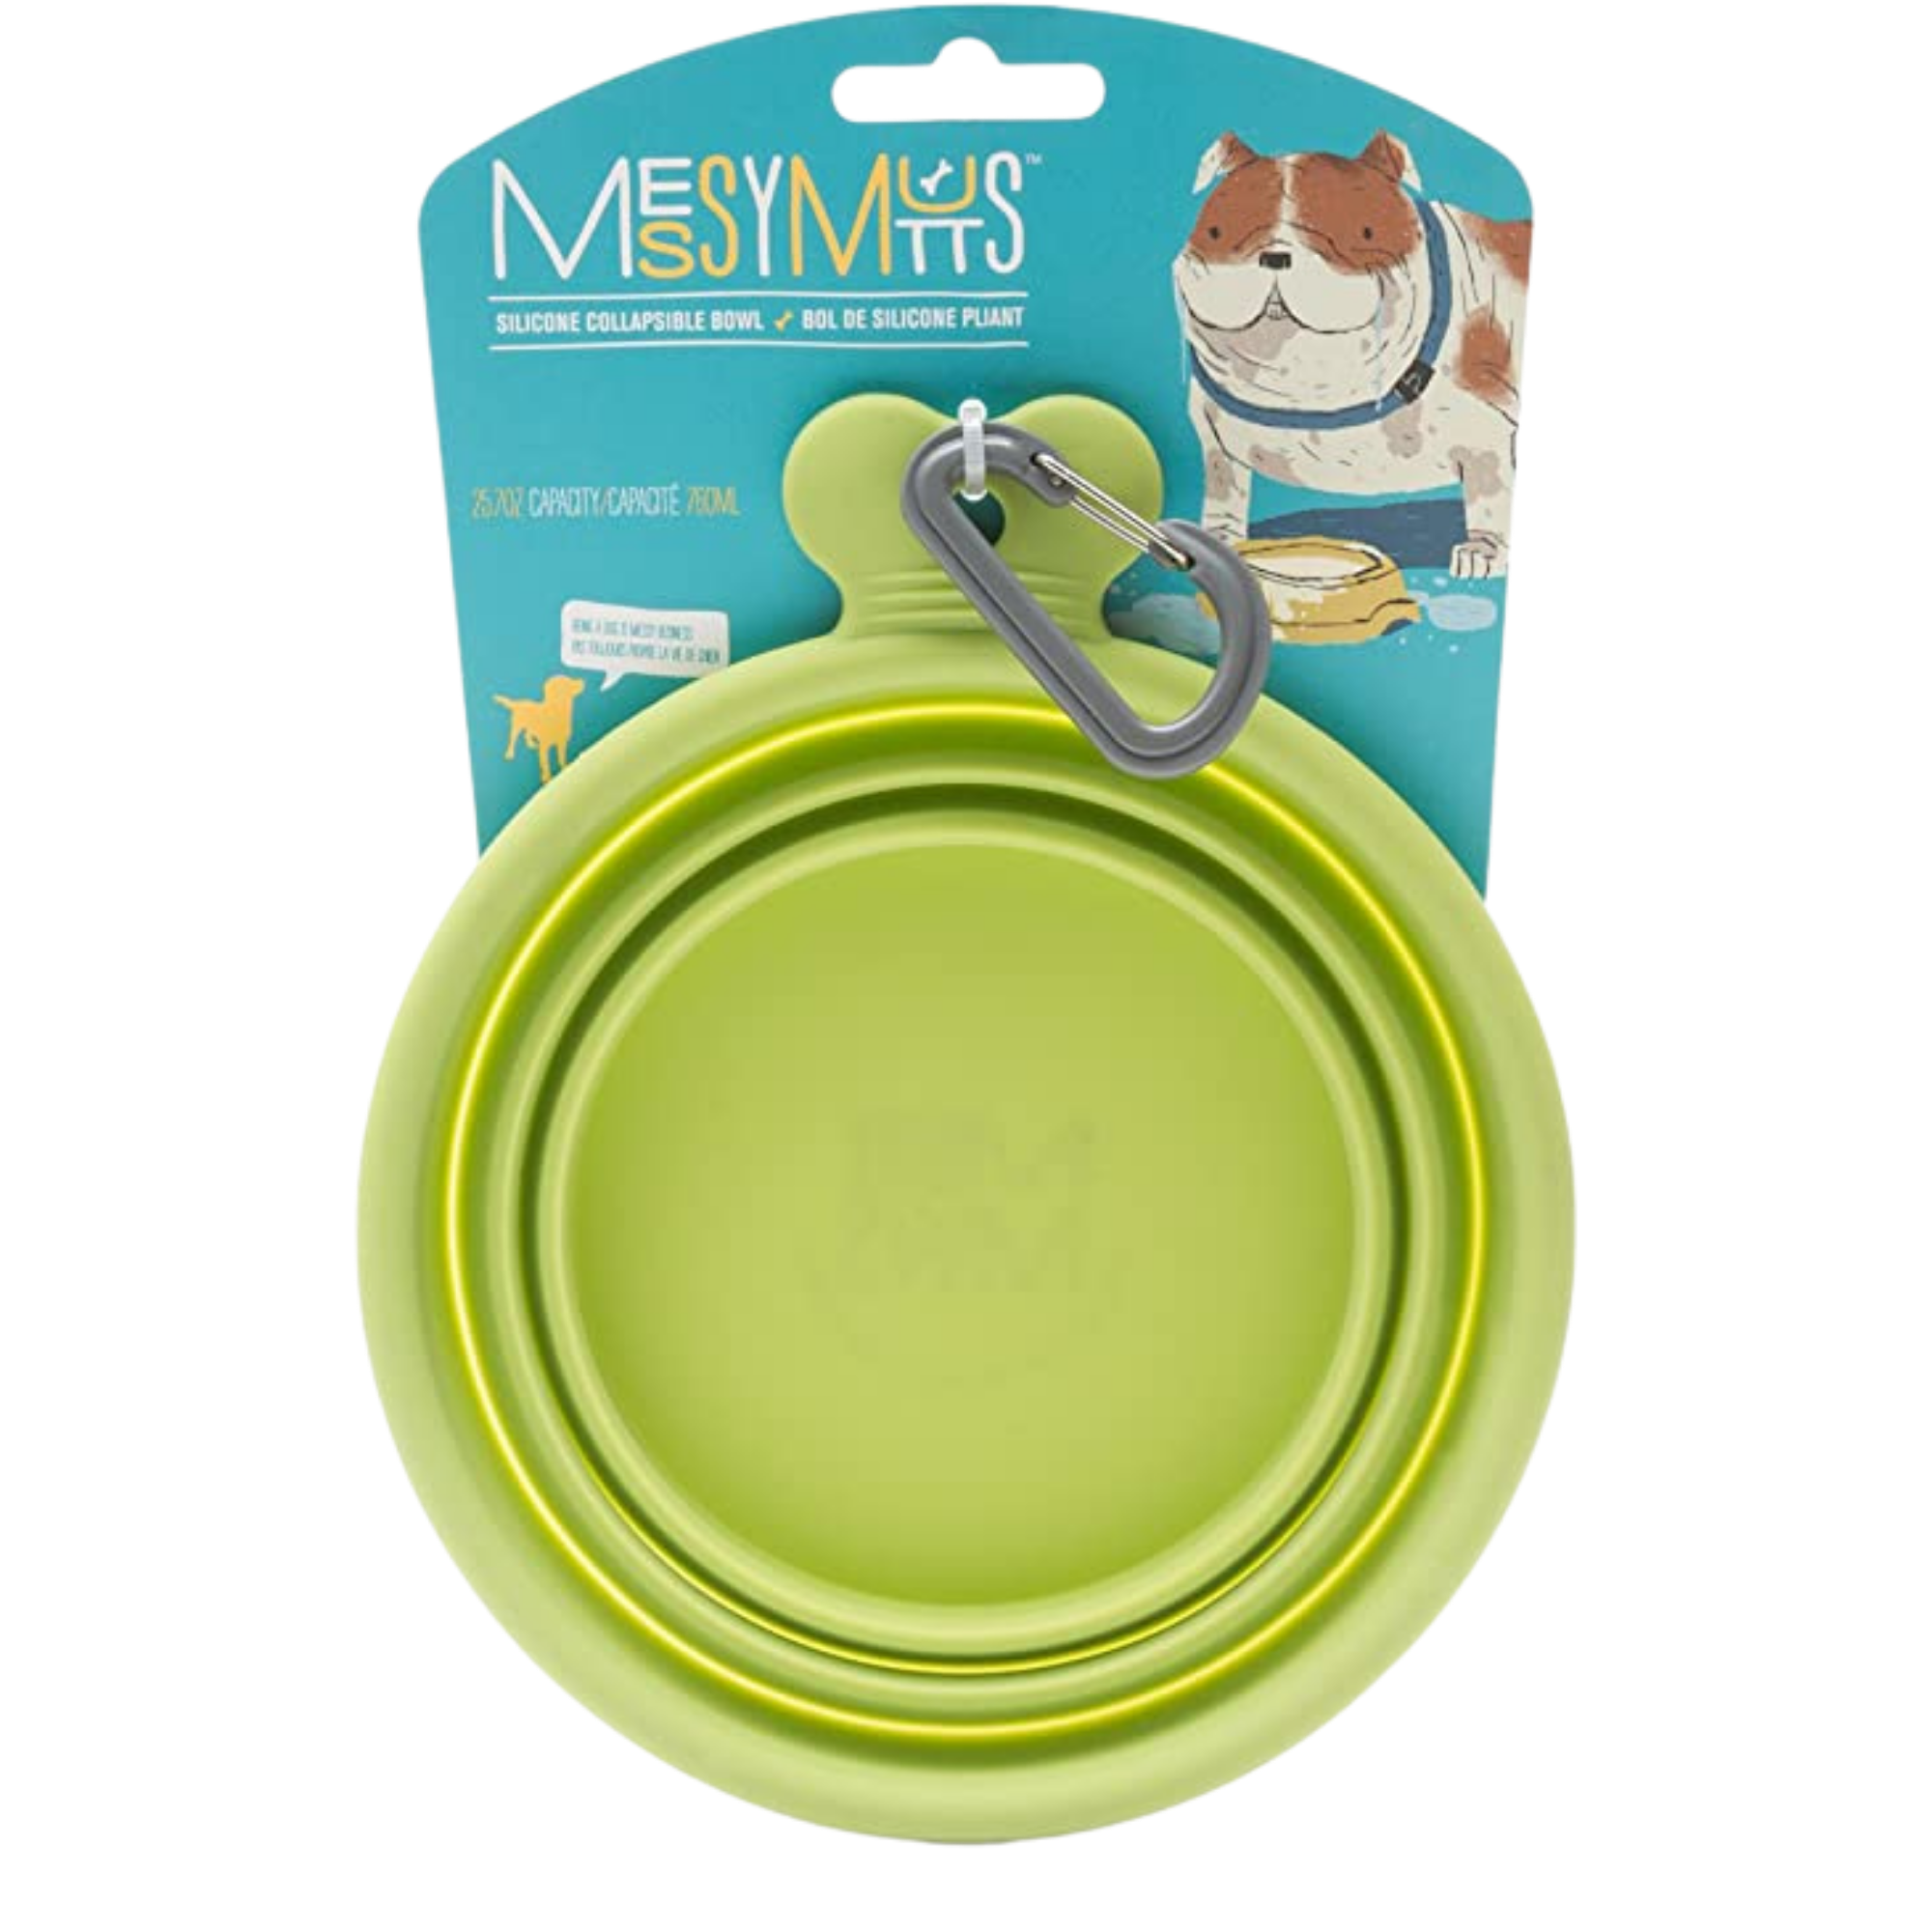 Messy Mutts Collapsible Bowl - Mutts & Co.